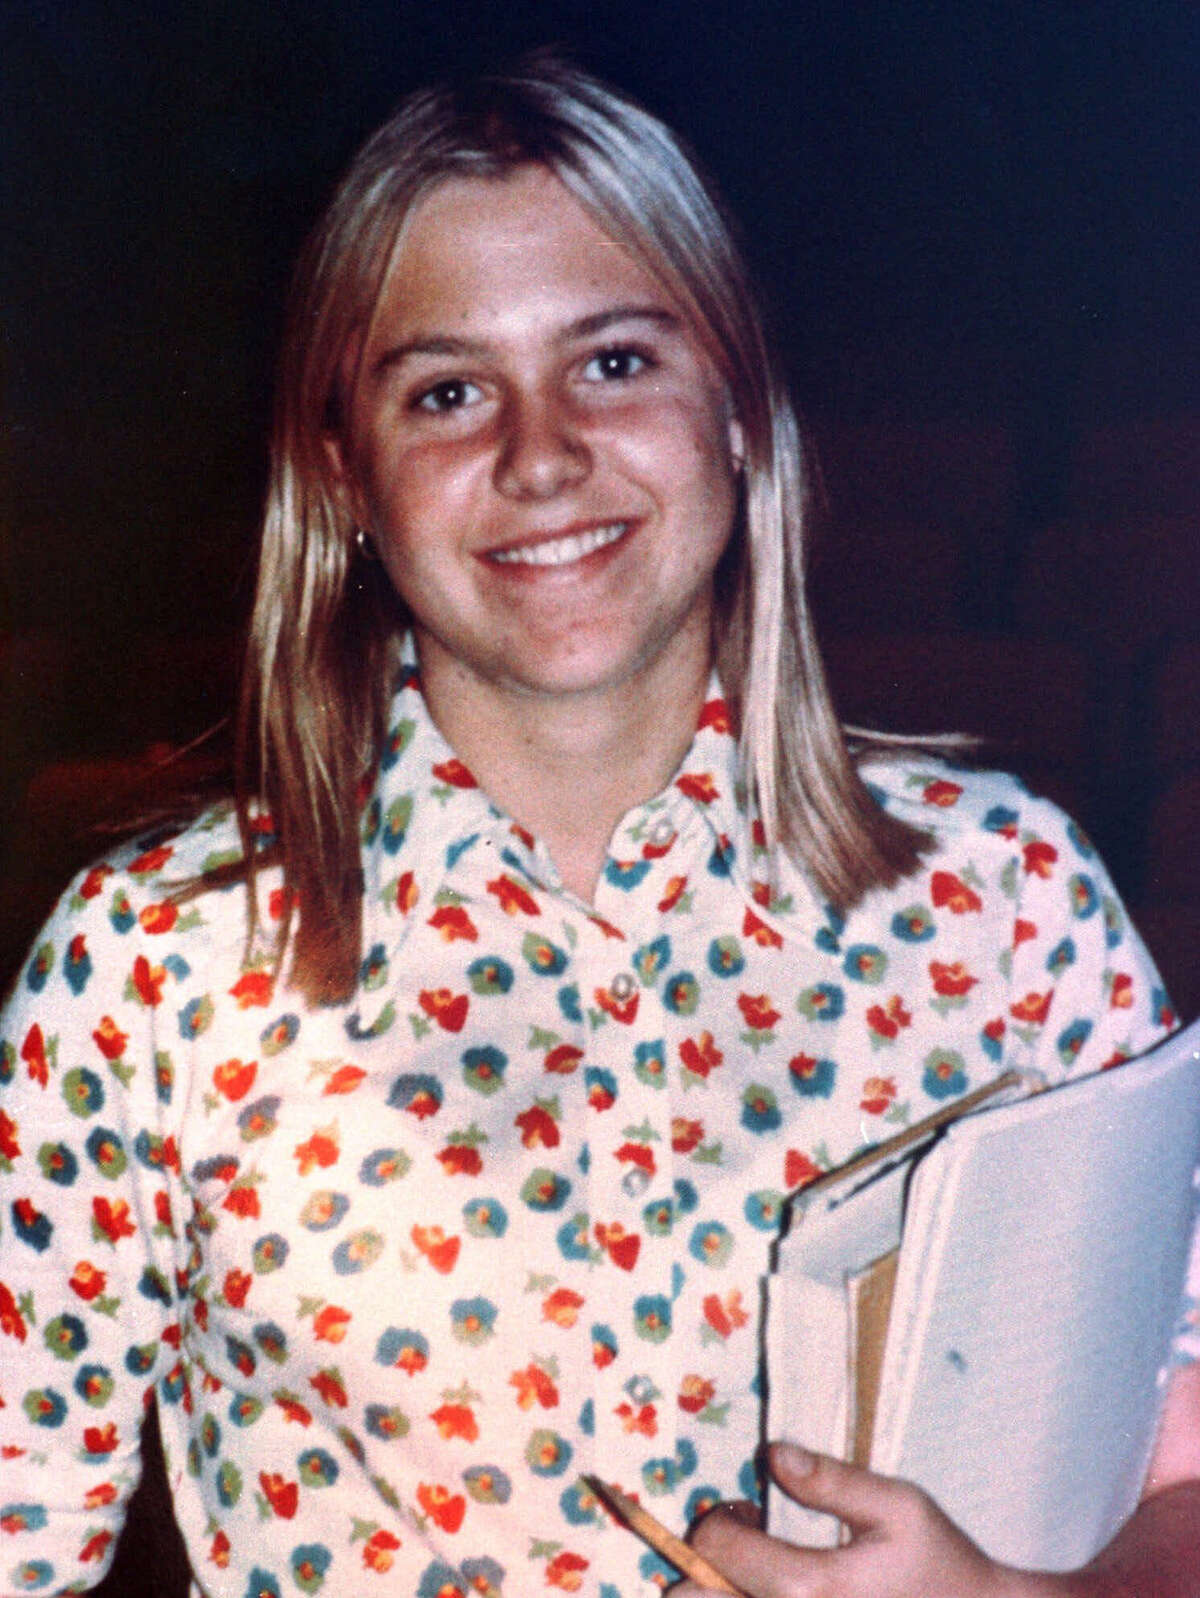 Martha Moxley, shown at age 14 in this 1974 photo, was murdered on Oct. 30, 1975. Michael Skakel's conviction in the death of Moxley was set aside and new trial ordered Oct. 23, 2013 by a Connecticut judge, Thomas Bishop, who ruled Skakel's trial attorney failed to adequately represent him when he was found guilty in 2002. Skakel's current attorney, Hubert Santos, said he expects to file a motion for bail on Thursday. If a judge approves it, Skakel could then post bond and be released from prison.